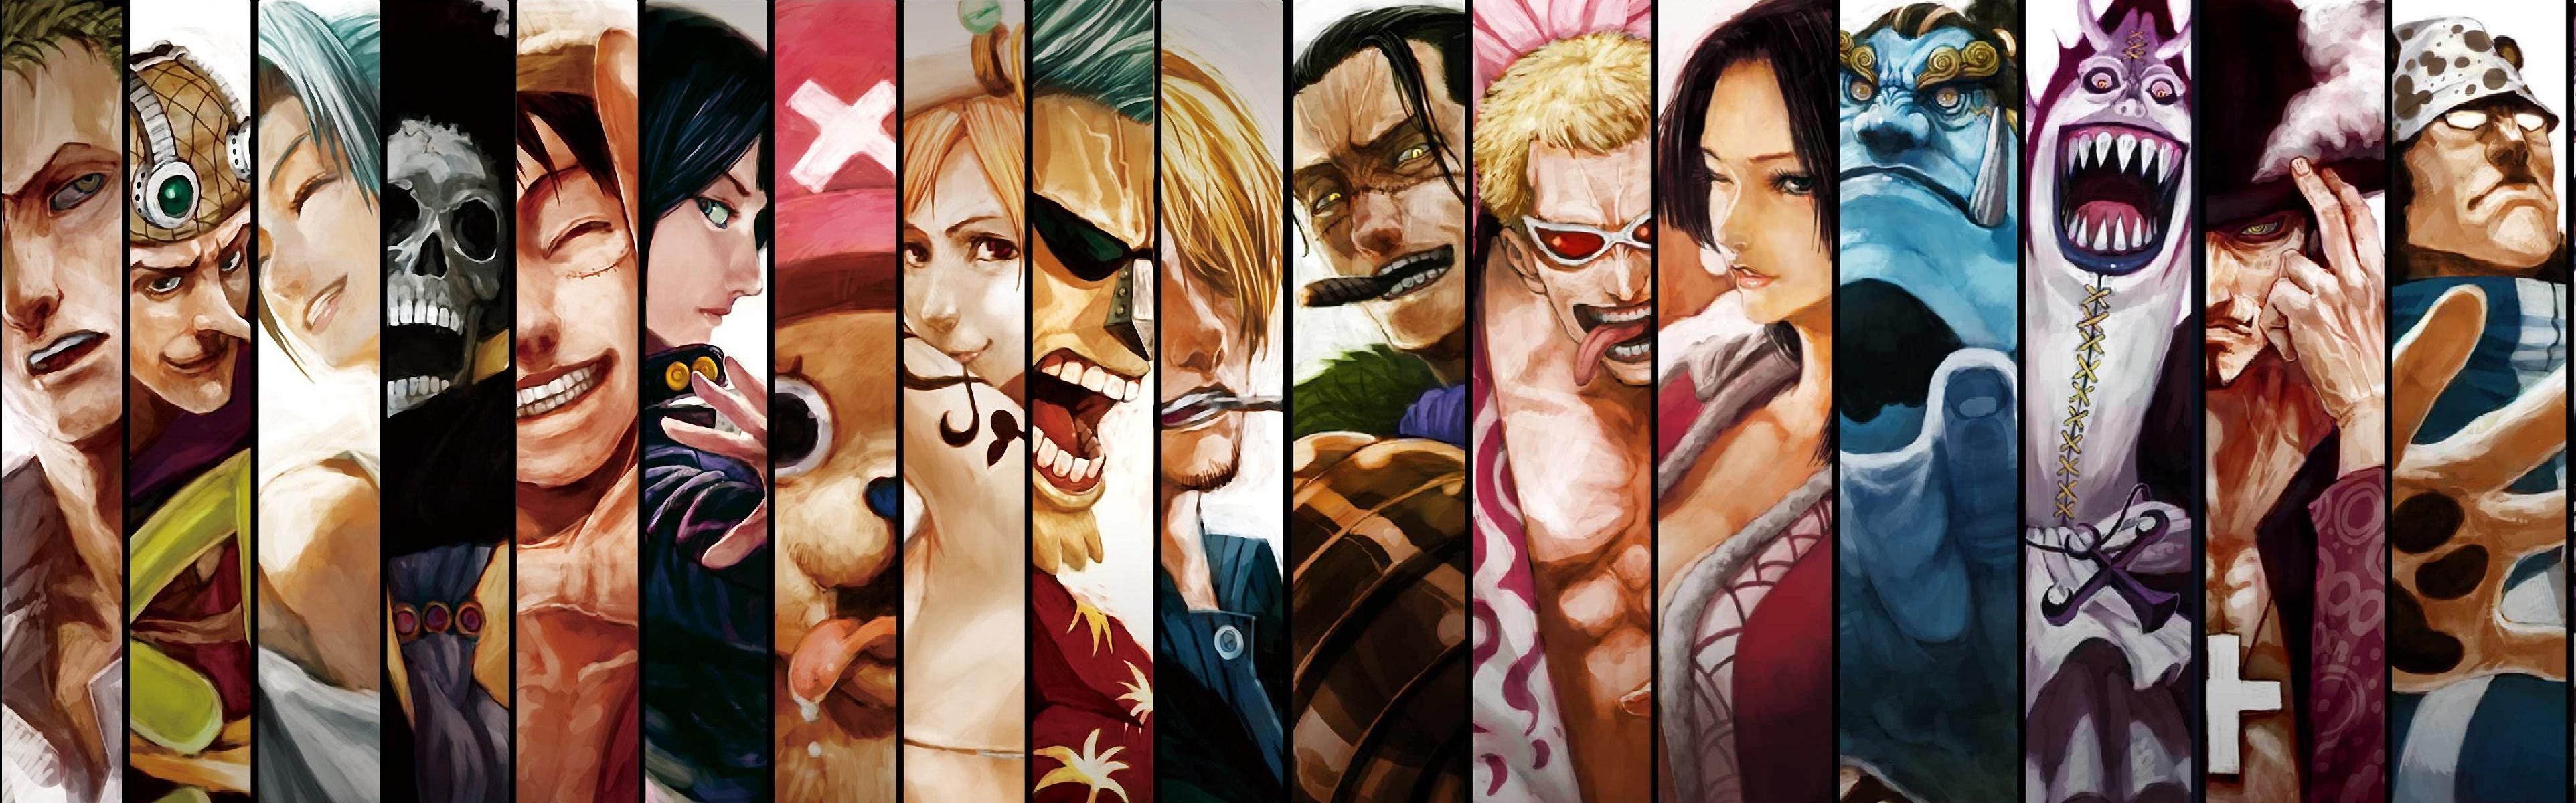 One Piece Wallpaper For Dual Monitor